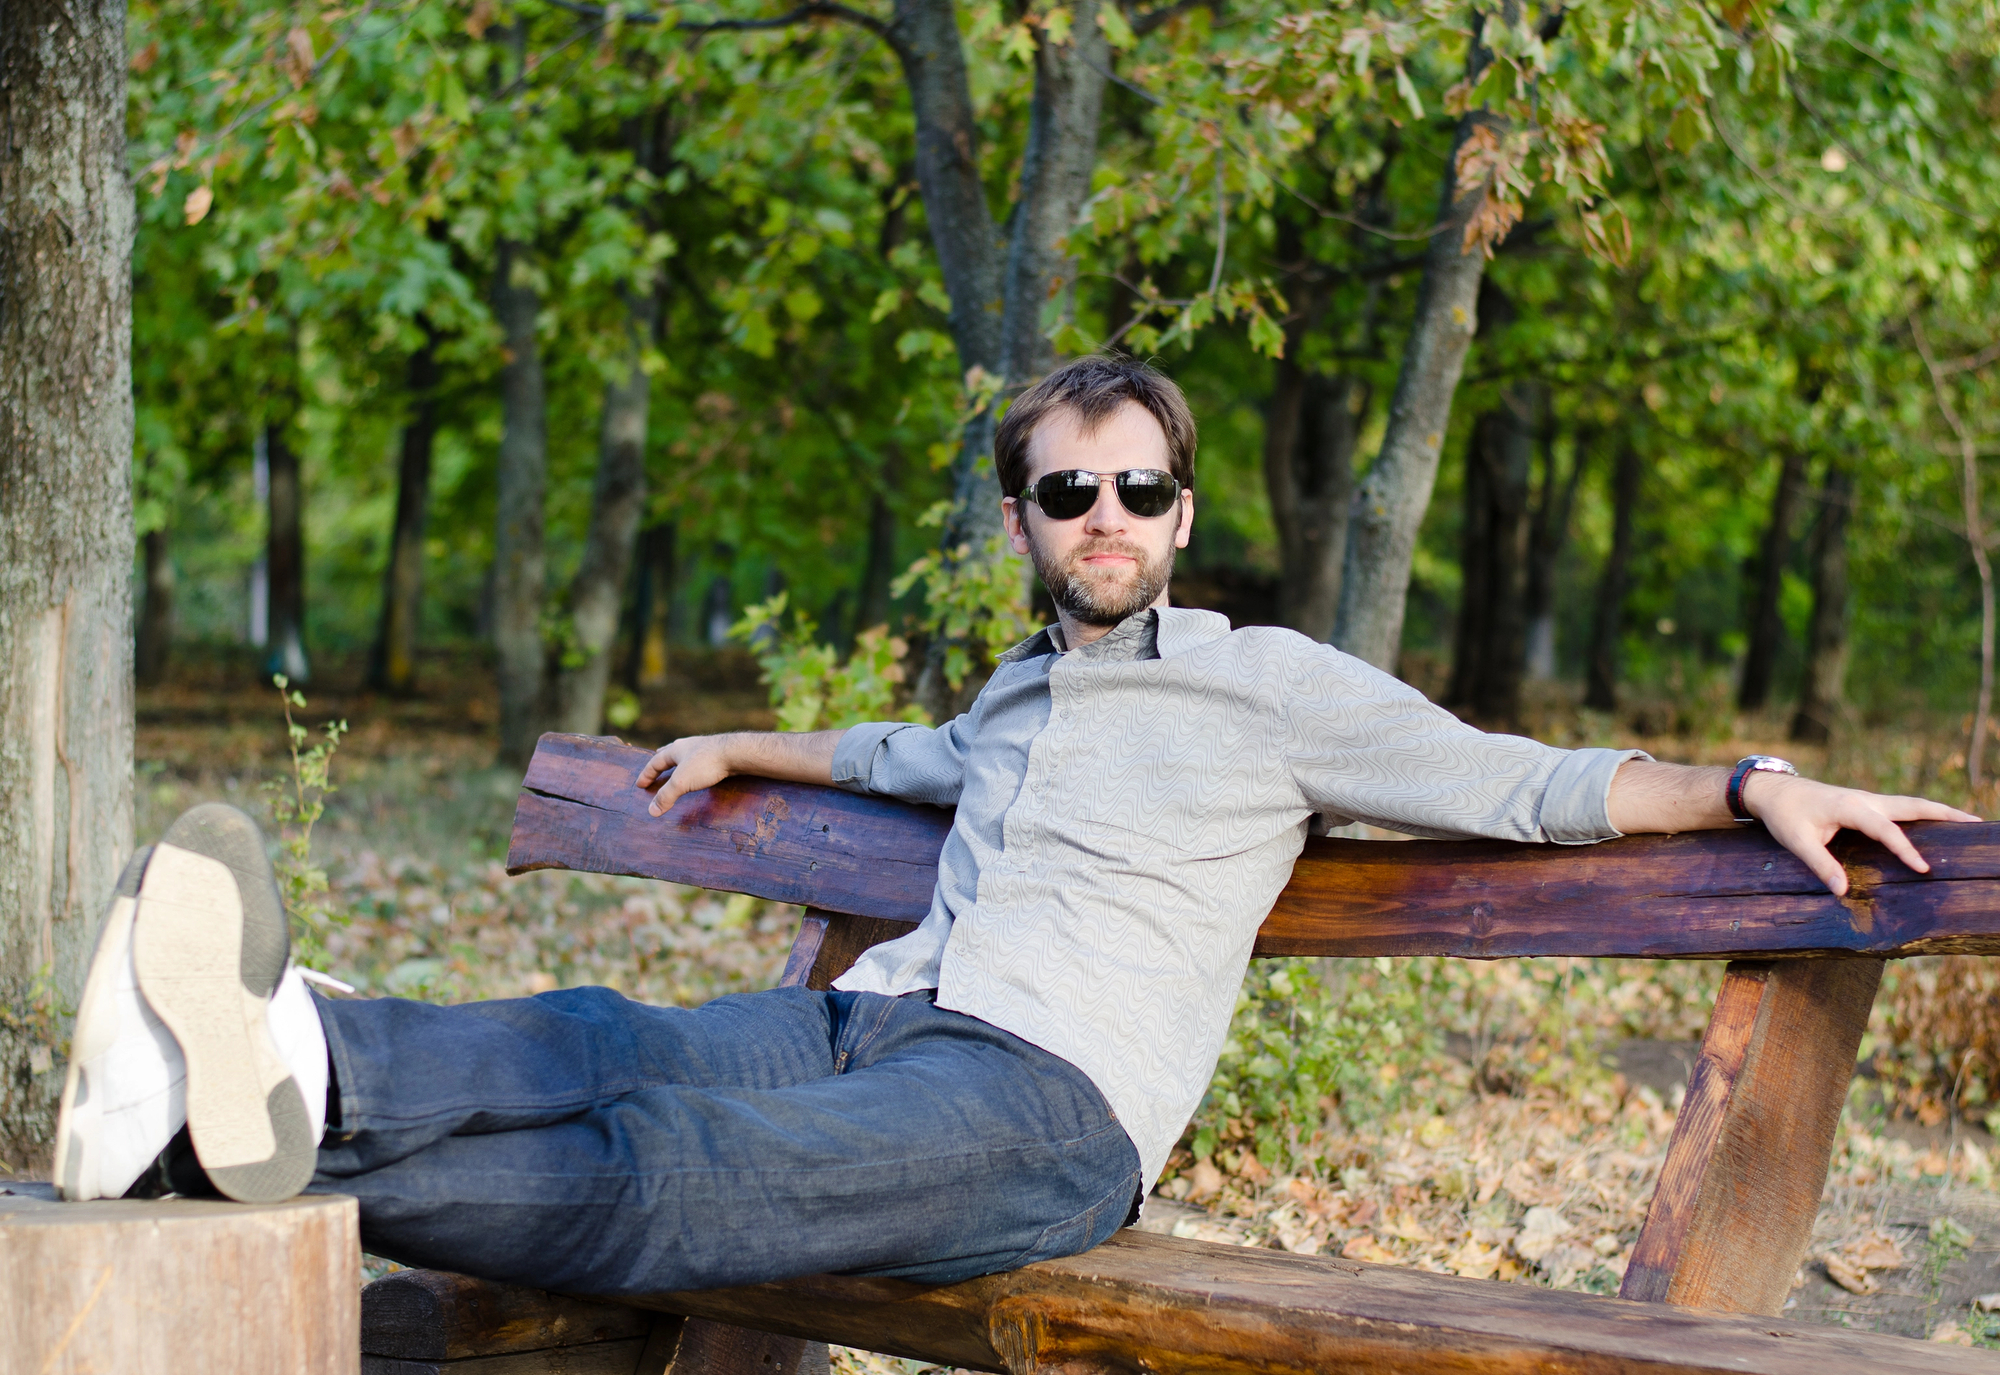 A man in sunglasses and casual clothing lies relaxed on a wooden bench in a park, with one leg resting on the bench and the other stretched out. The background features green trees, creating a serene, natural setting.